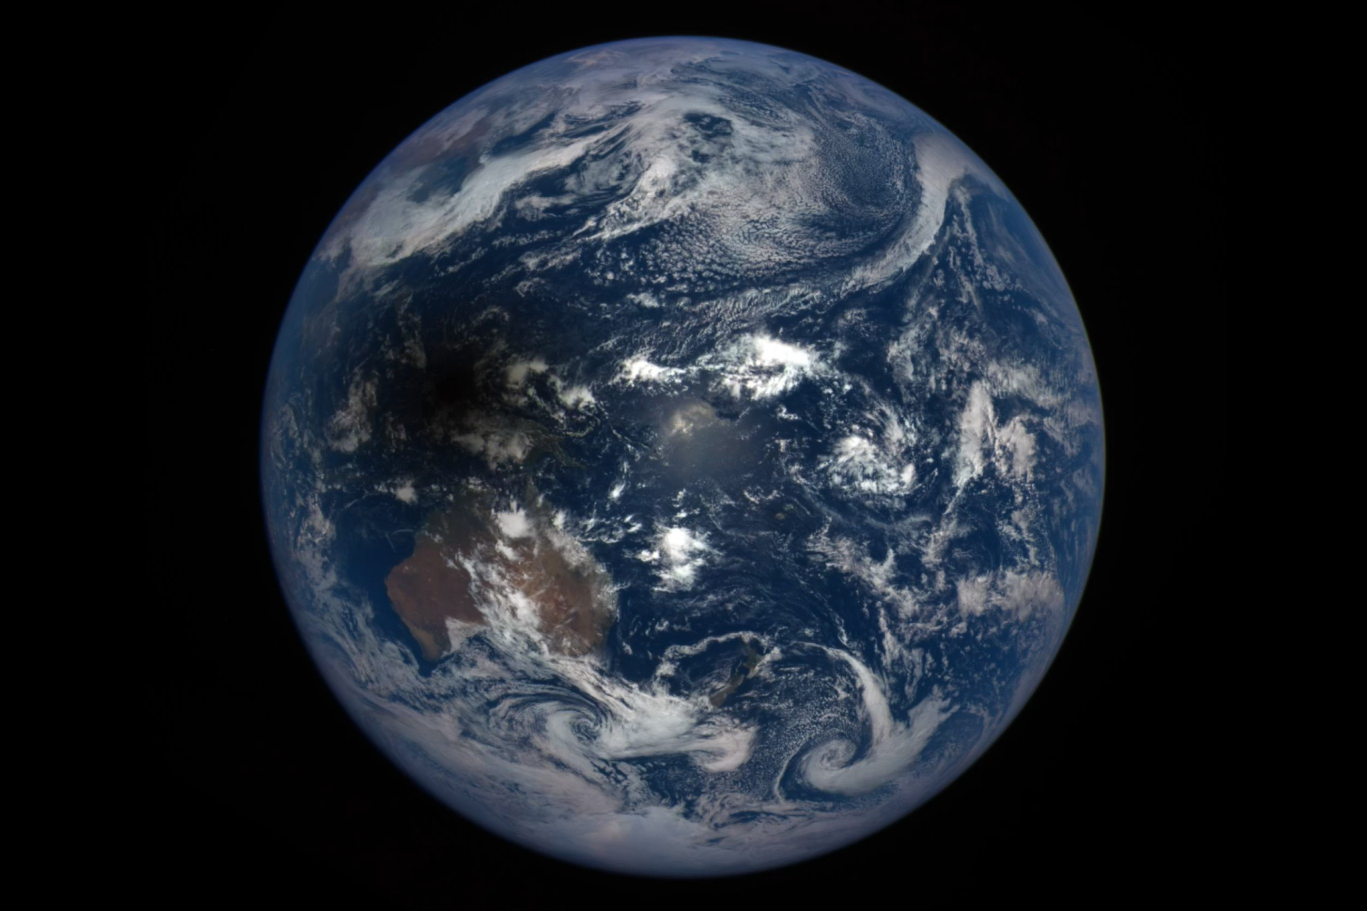 Earth Looks Bruised In The Shadow Of The Eclipse